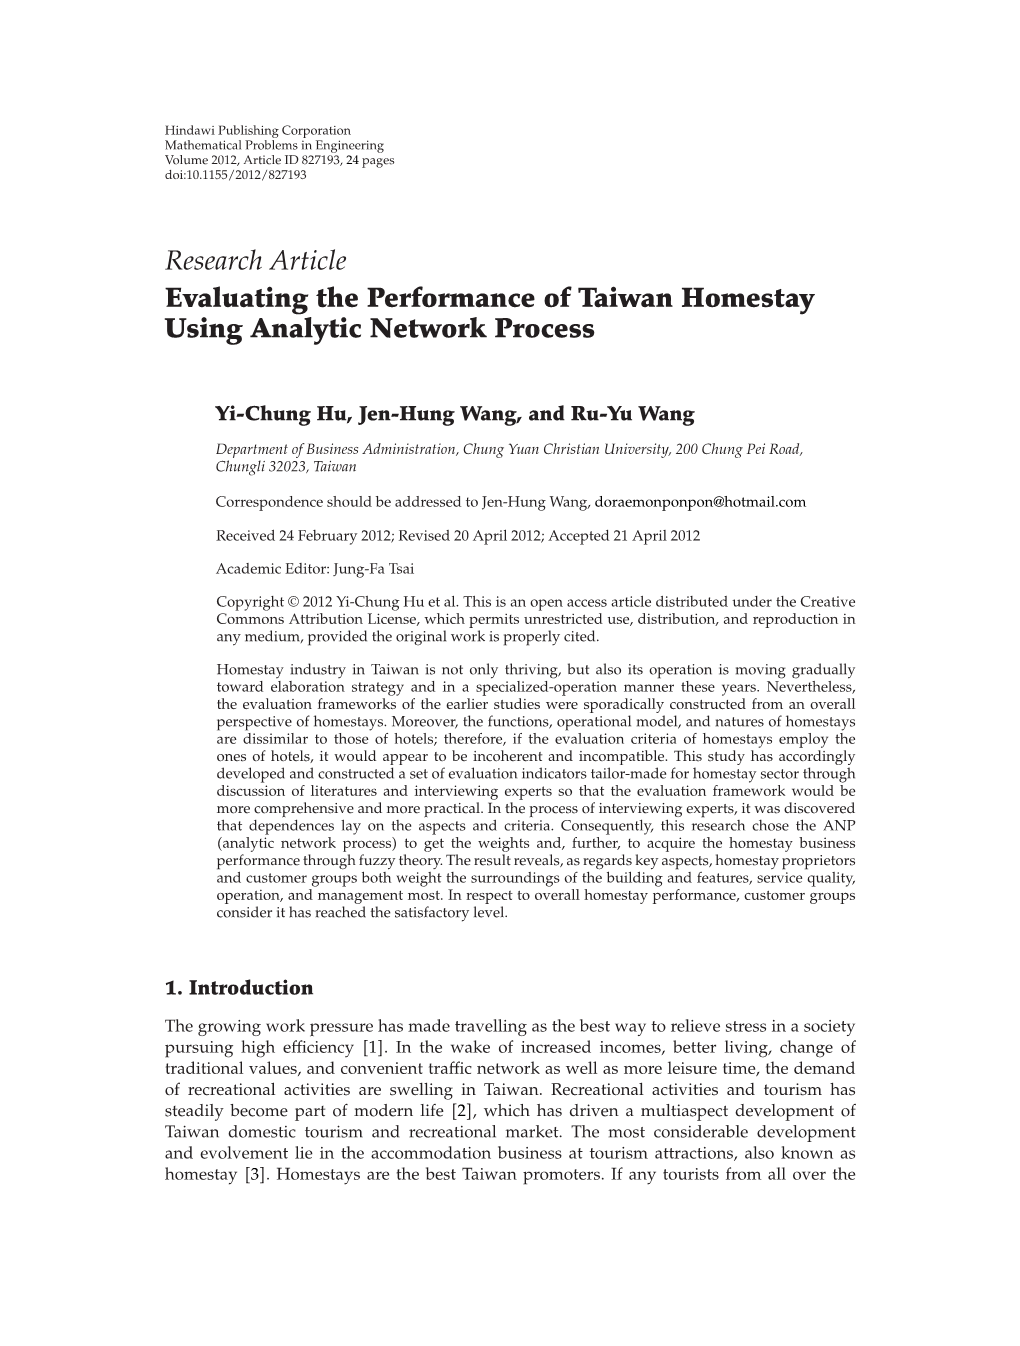 Evaluating the Performance of Taiwan Homestay Using Analytic Network Process